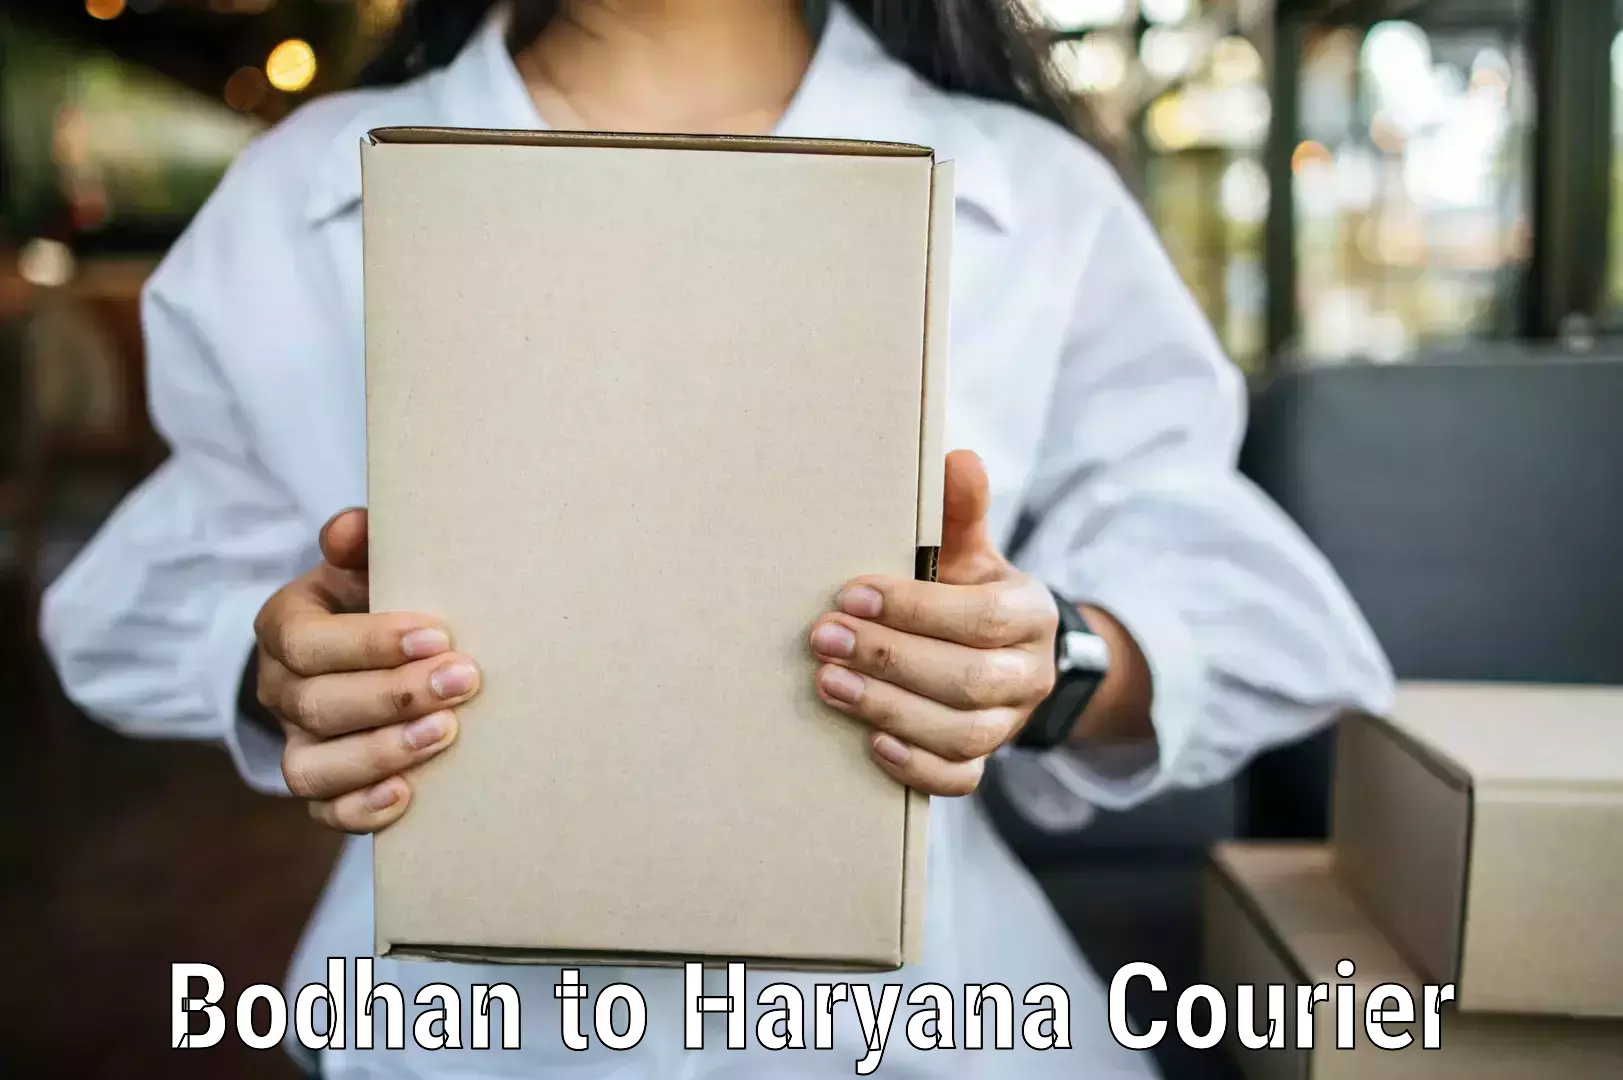 Punctual parcel services Bodhan to NCR Haryana